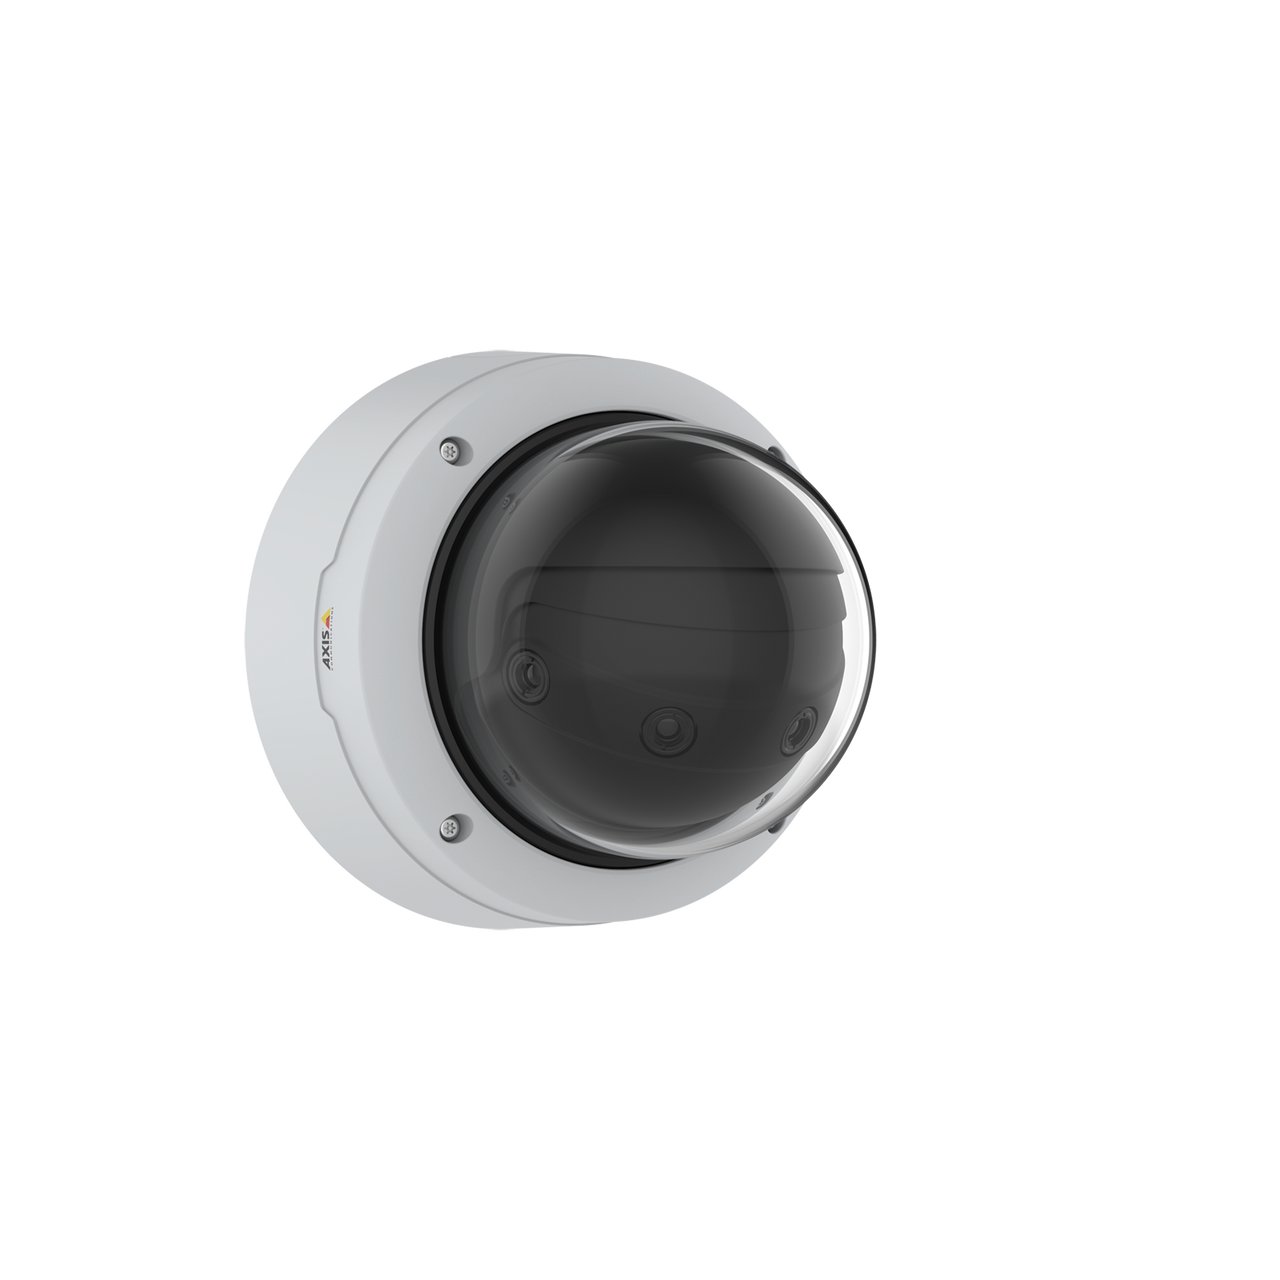 AXIS Q3819-PVE Panoramic camera for seamless, 180° coverage